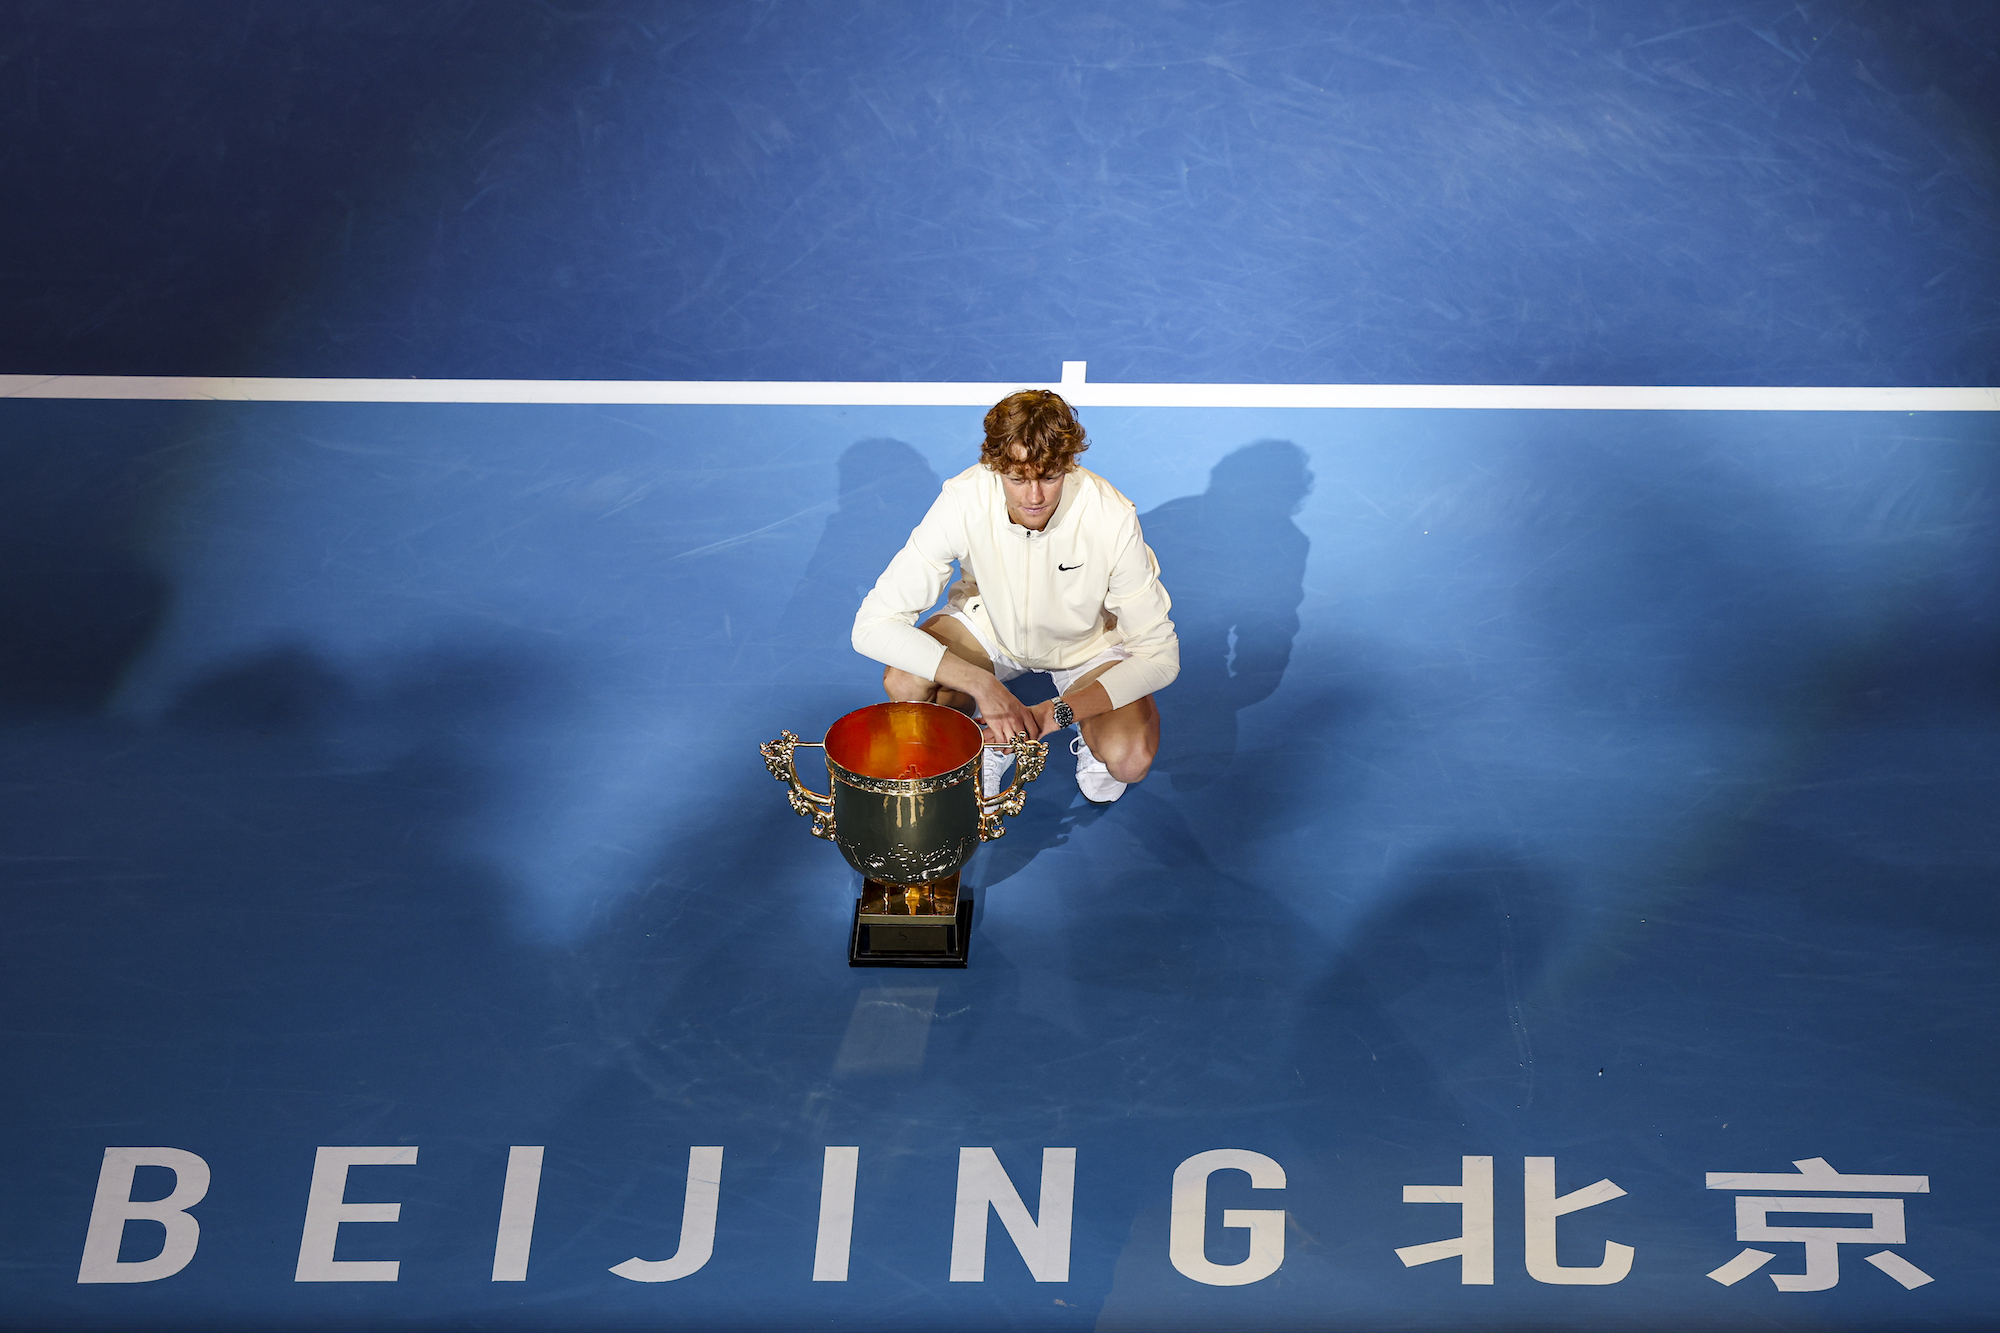 Jannik Sinner poses with the China Open trophy